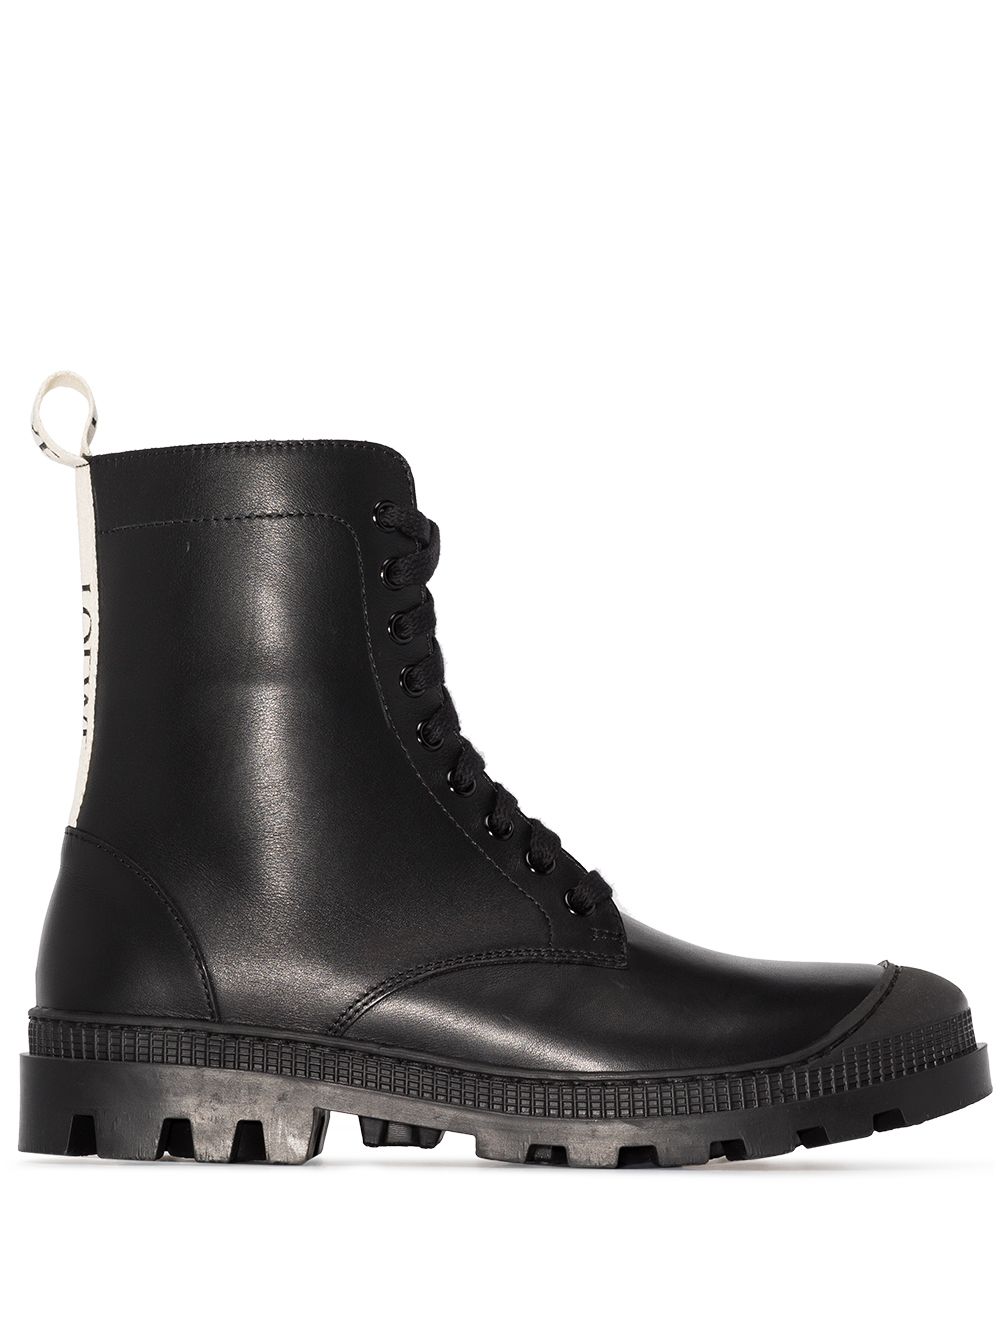 Shop black LOEWE lace-up leather boots 